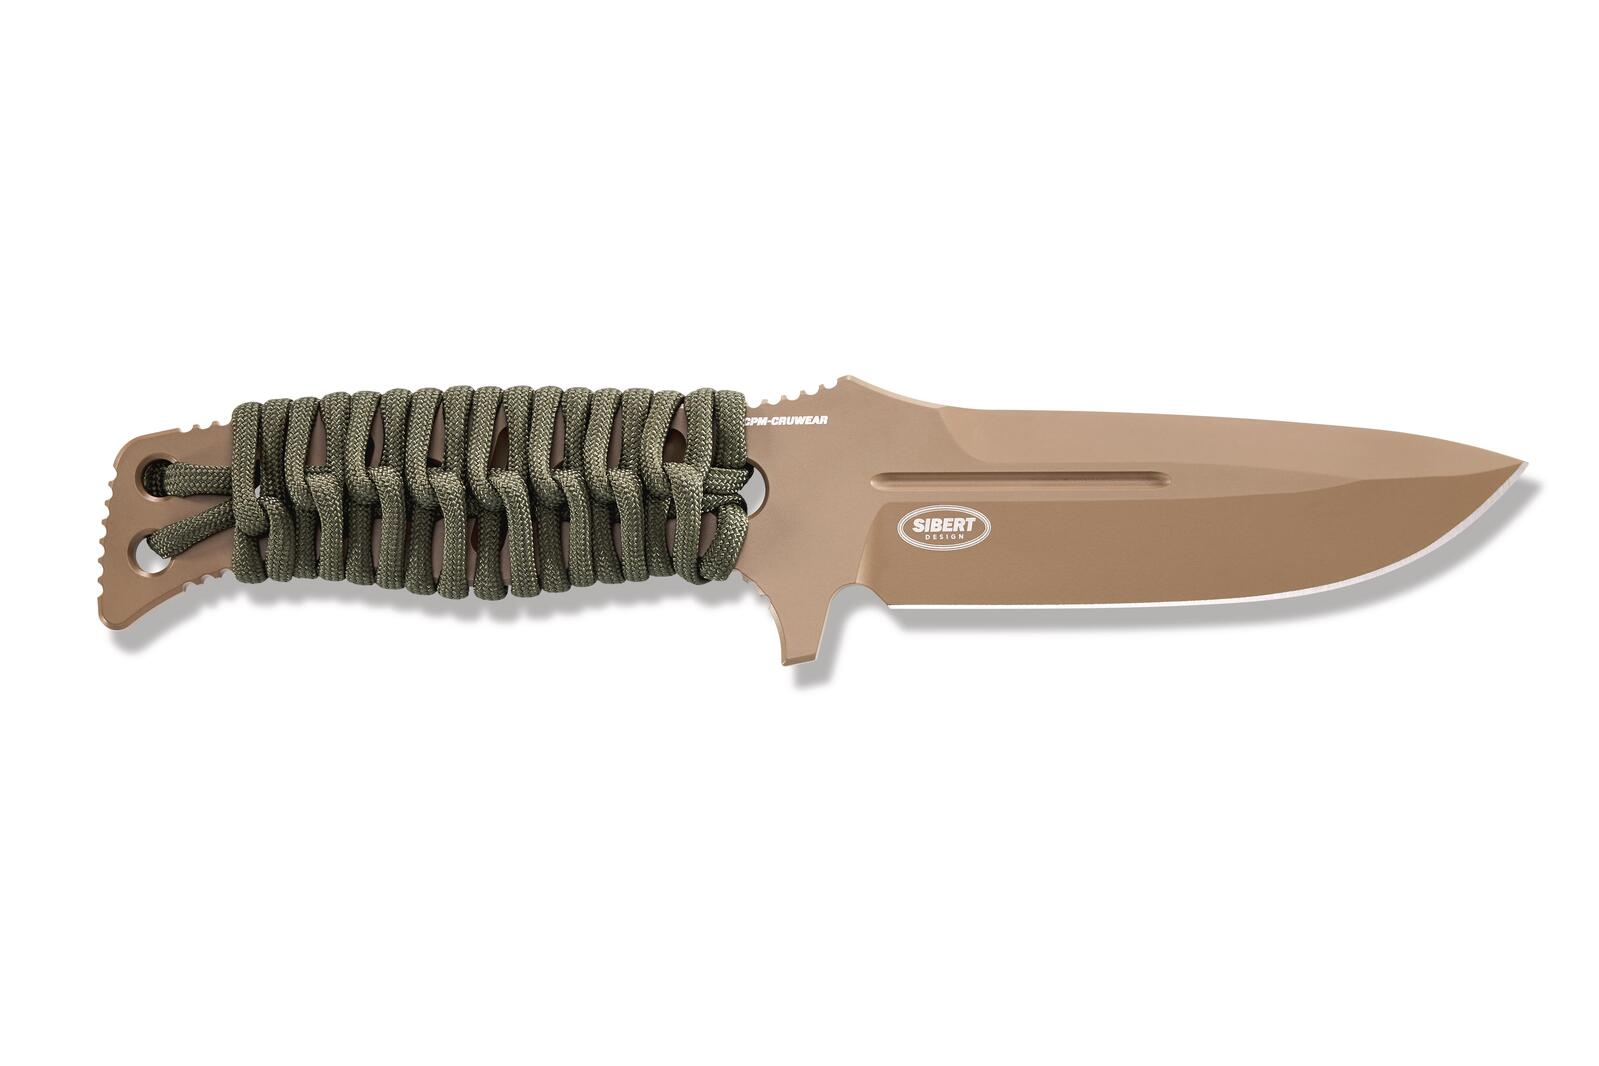 Benchmade 375FE-1 Adamas Knife - Fixed Blade - Flat Earth Handle and Olive Drab Paracord - Wander Outdoors